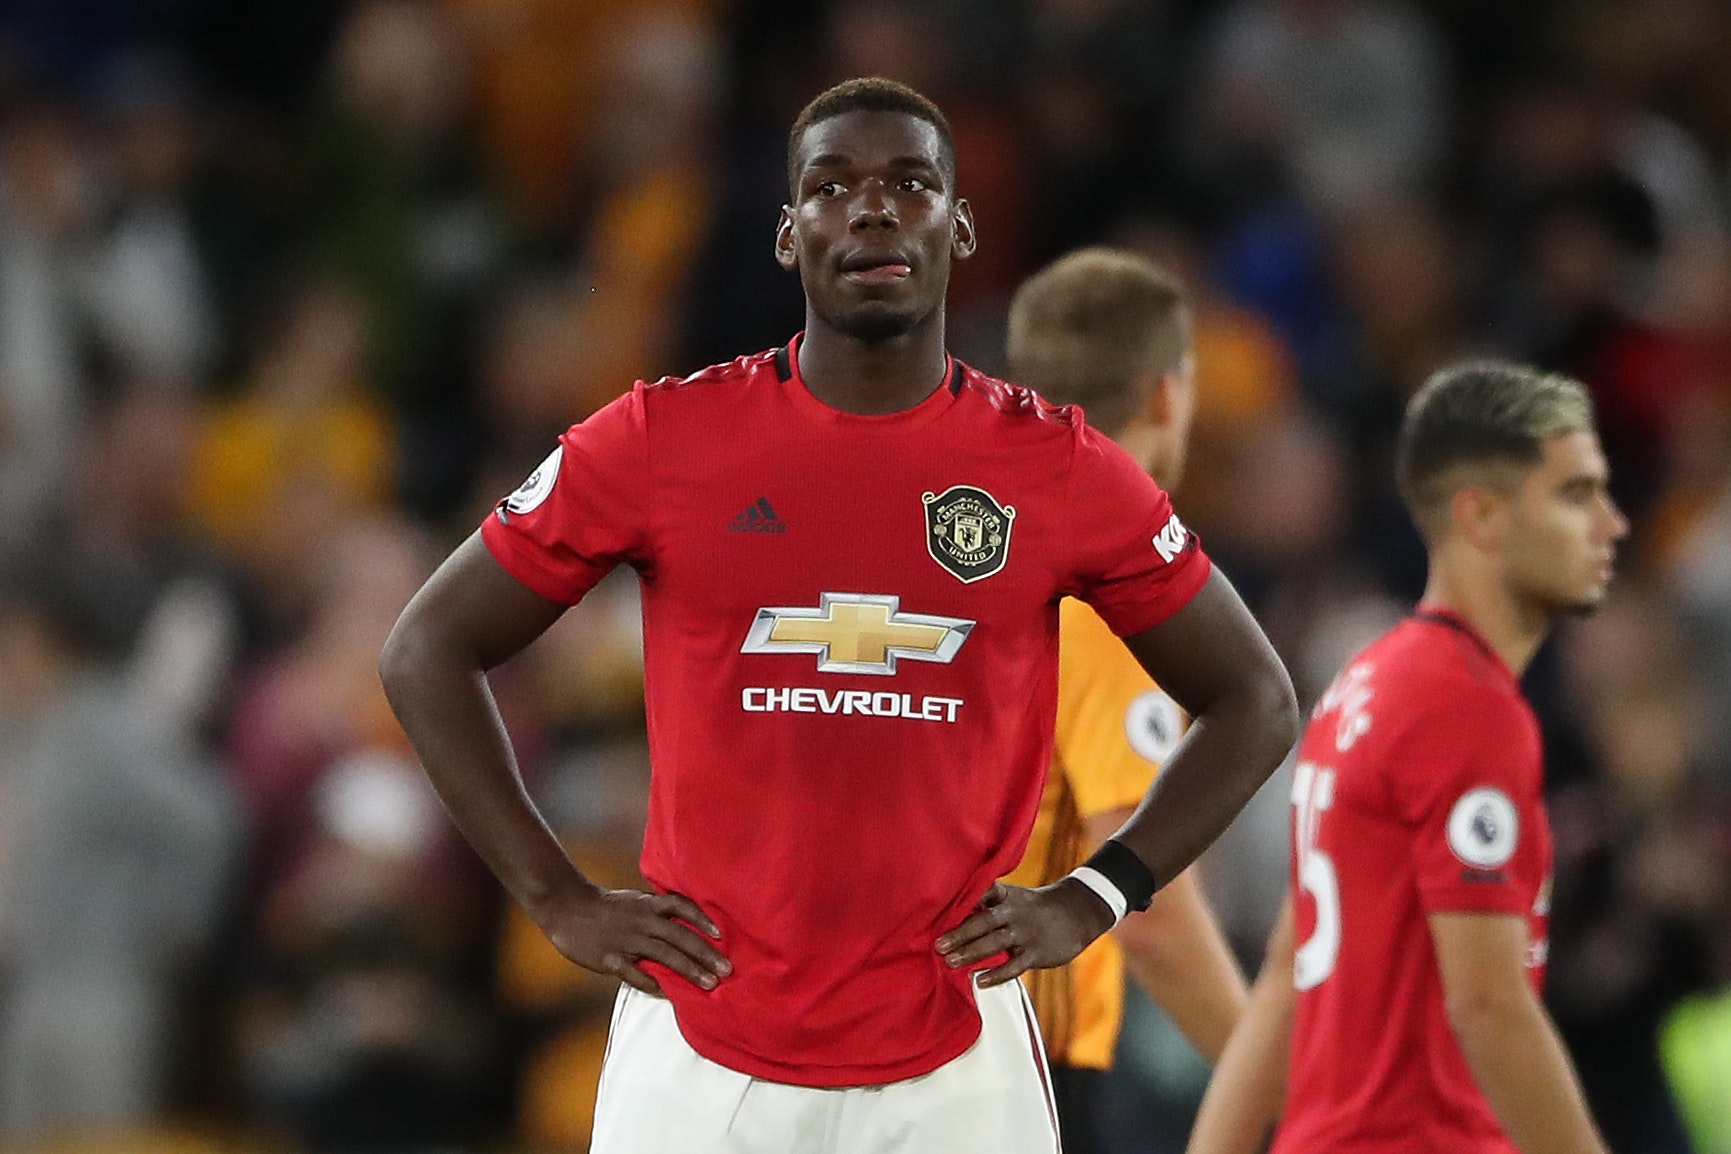 ‘Never want to see him in our shirt again’ – These Manchester United fans blast star’s ‘shocking’ performance vs Wolves - Bóng Đá